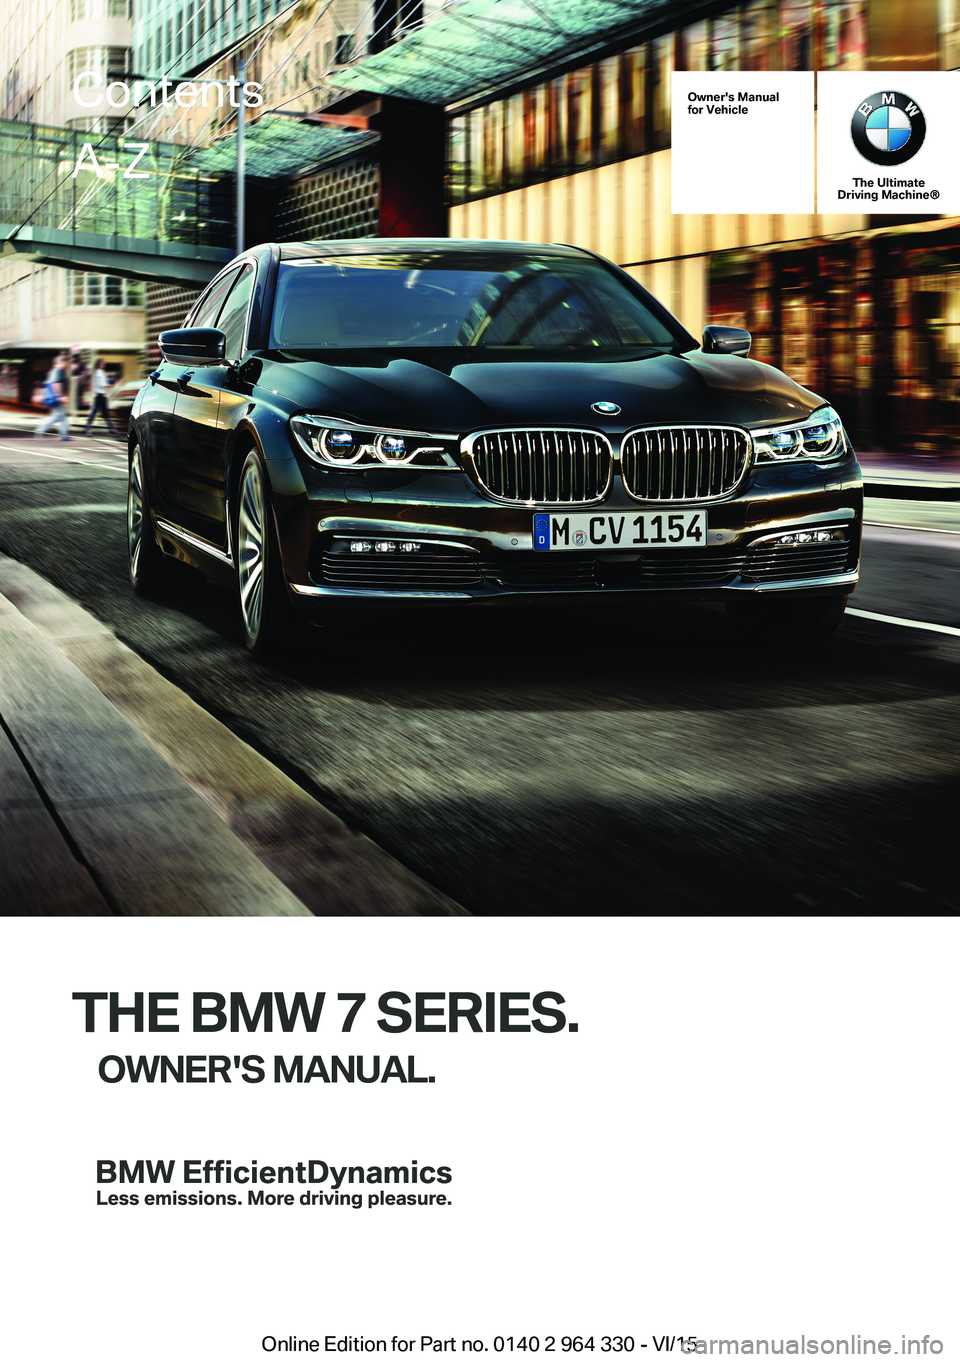 BMW 760LI SEDAN 2015  Owners Manual Owner's Manualfor Vehicle
The UltimateDriving Machine®
THE BMW 7 SERIES.
OWNER'S MANUAL.ContentsA-Z
Online Edition for Part no. 0140 2 964 330 - VI/15   